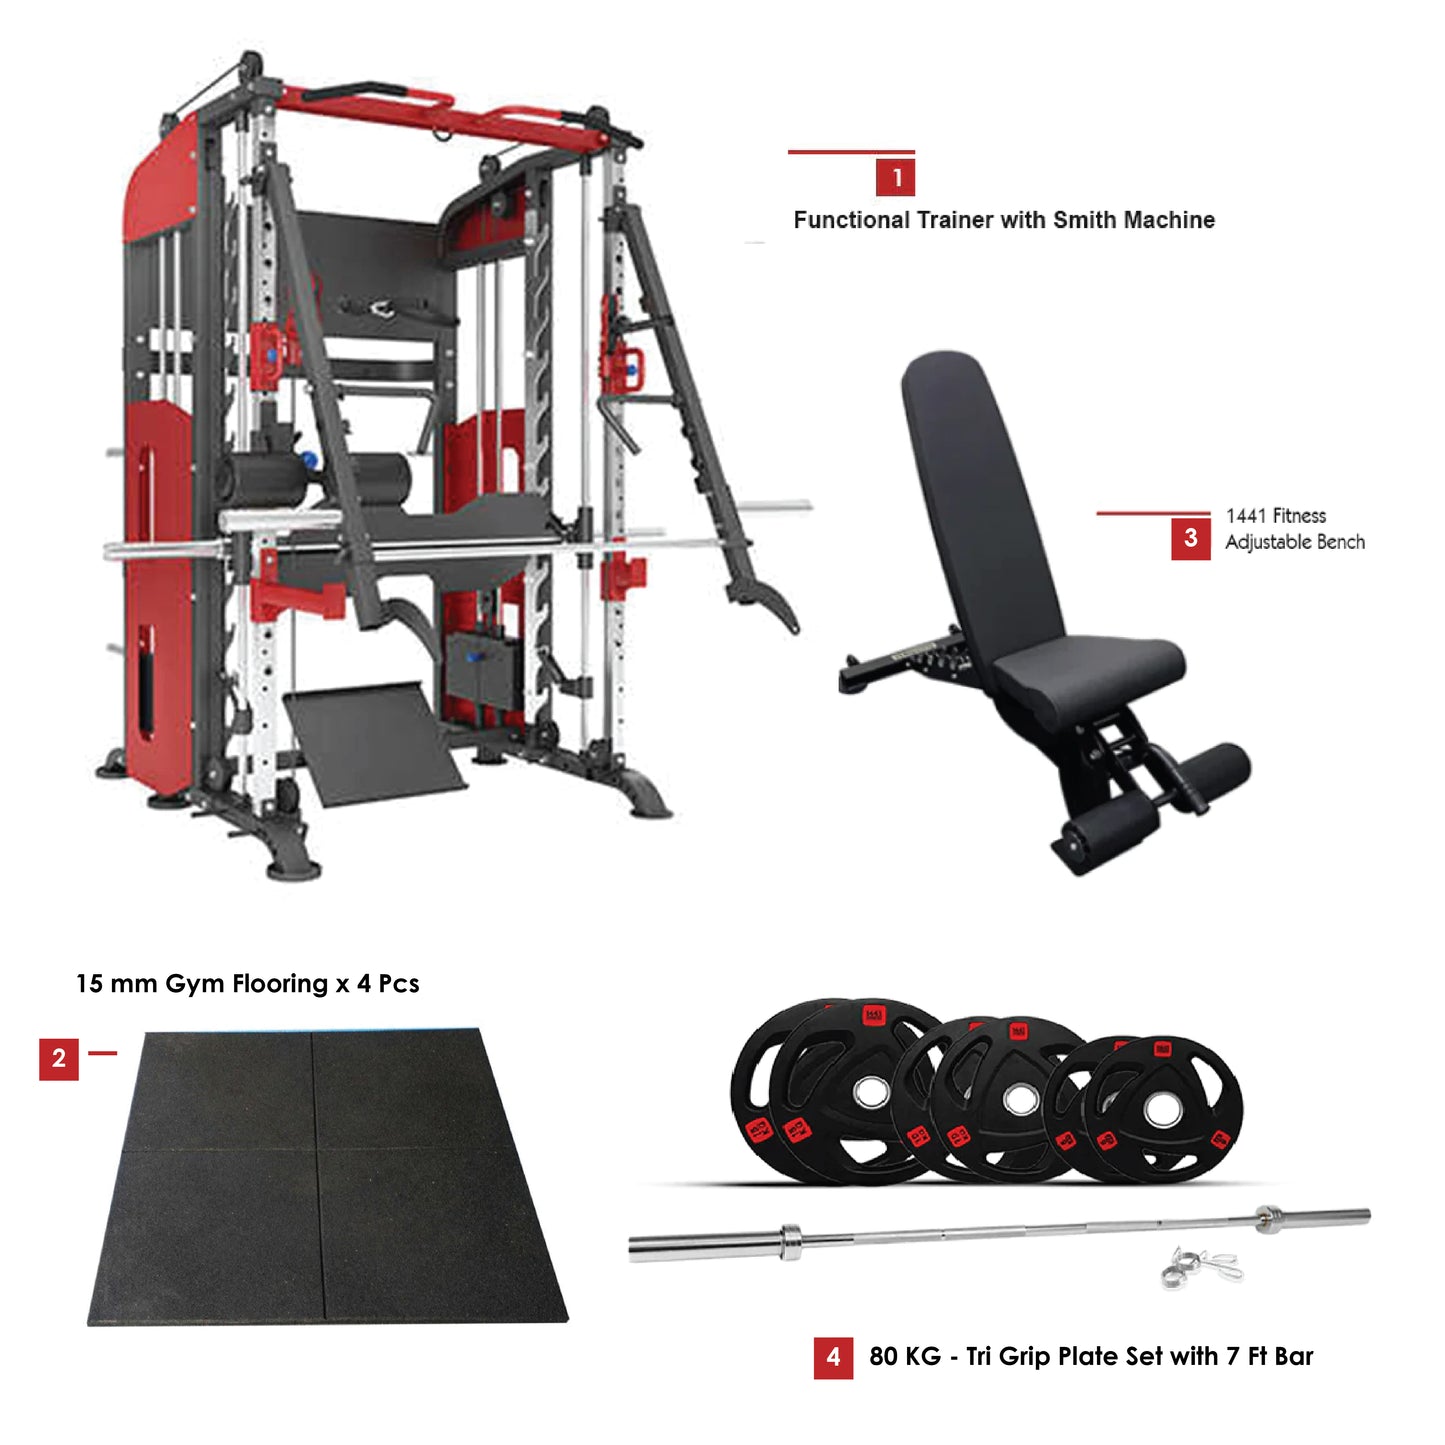 Combo Deal | 1441 Fitness Heavy Duty Functional Trainer 41FC90 with Smith Machine-41FC90 +  7ft Bar with Tri Grip Plate 80 KG Set + Adjustable Bench A8007 + 4 Gym Tile